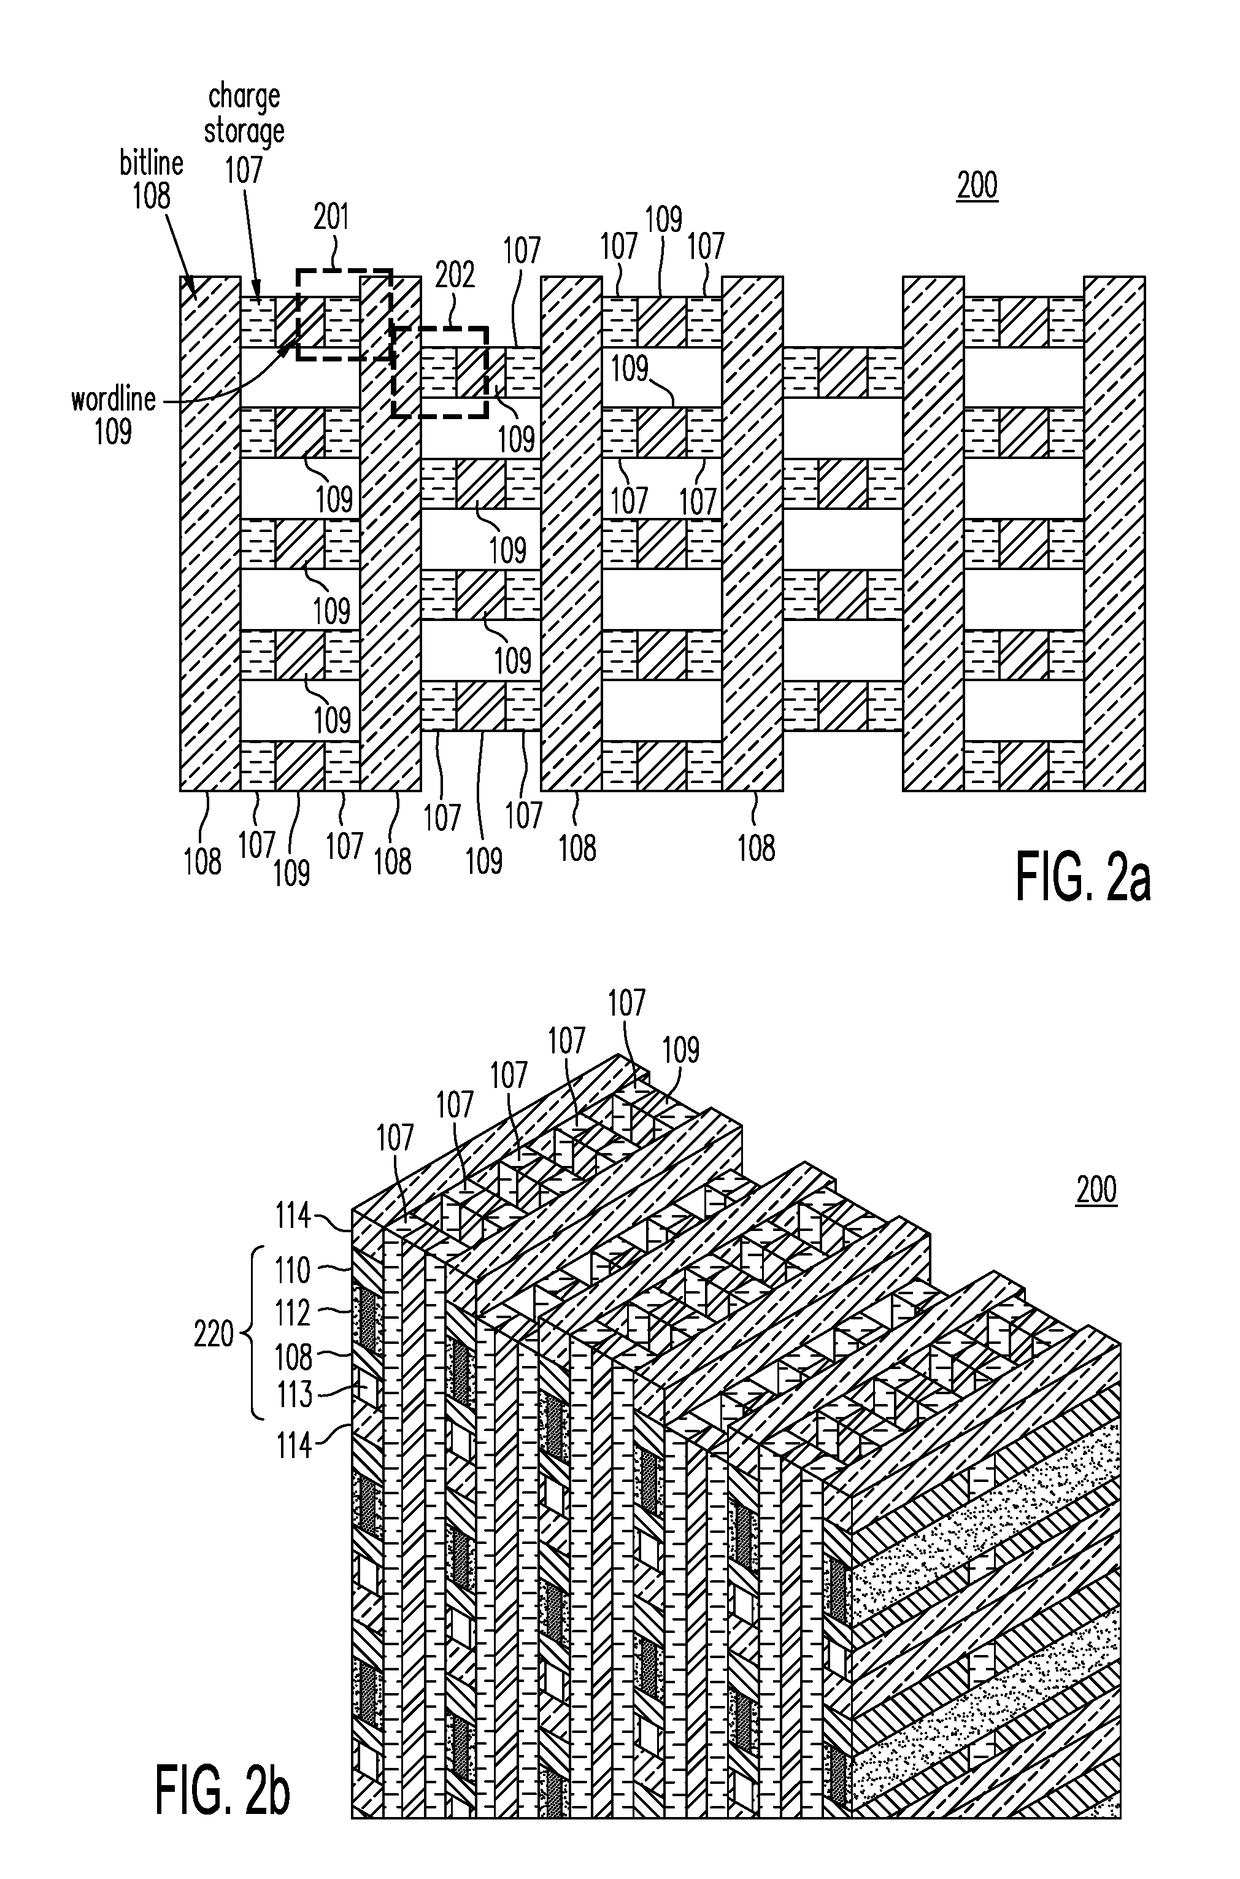 Staggered Word Line Architecture for Reduced Disturb in 3-Dimensional NOR Memory Arrays